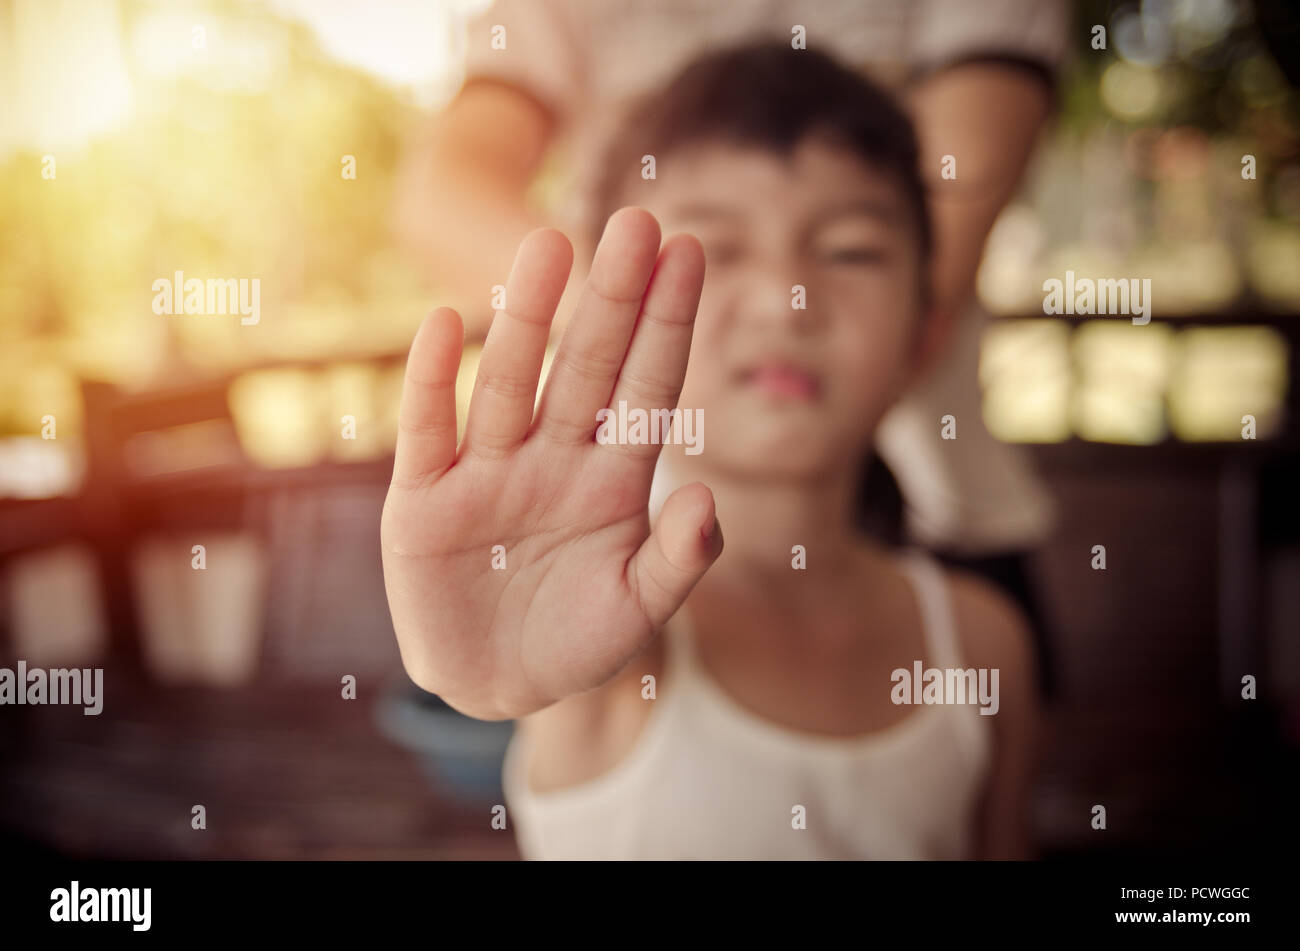 A girl showing an open hand signal that means stop or wait isolated on a blurred background Stock Photo